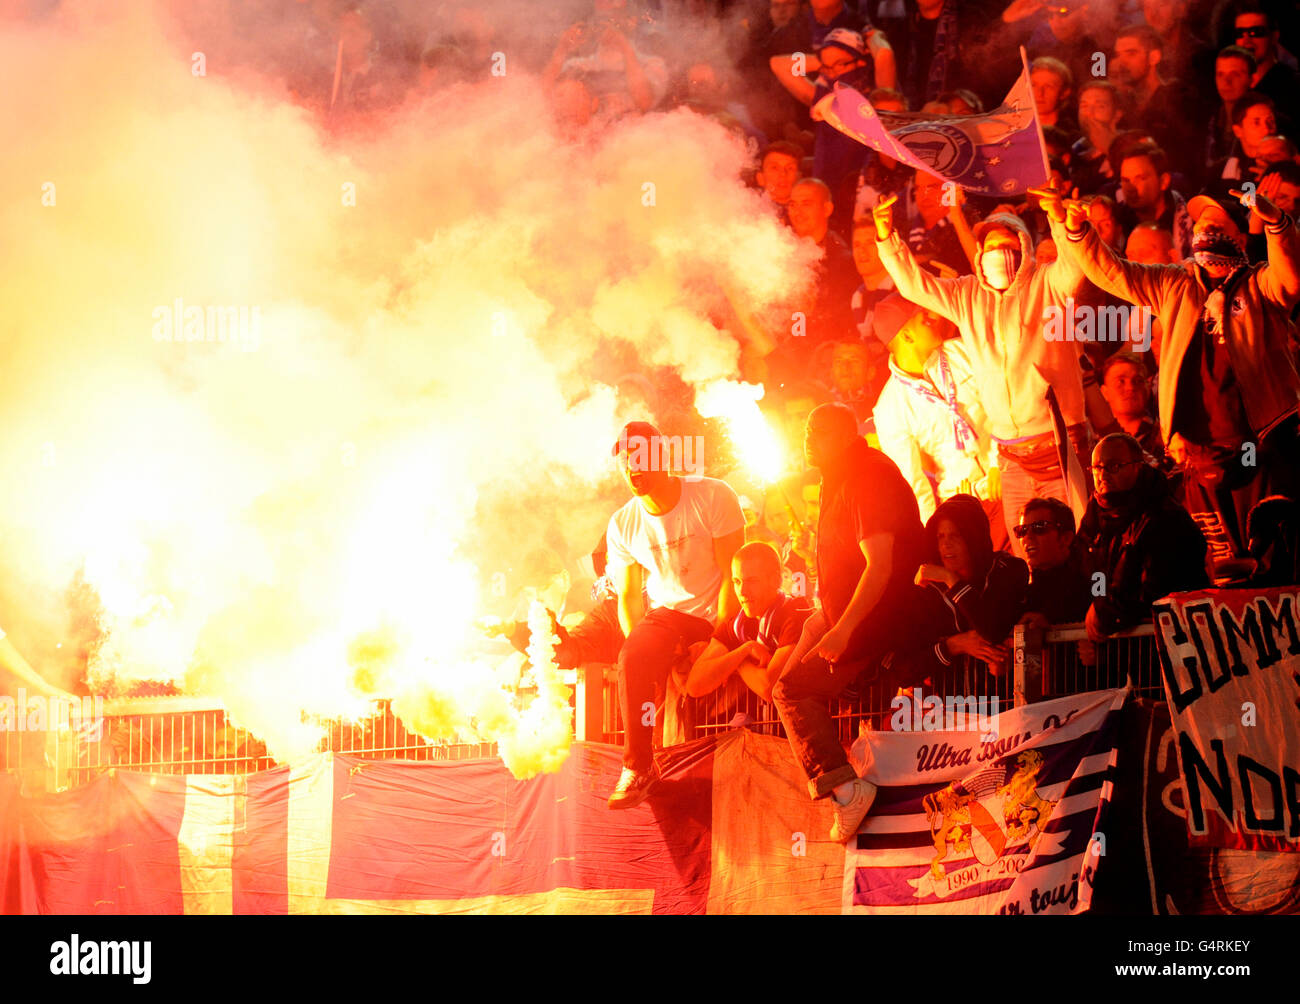 Fans of Hertha BSC Berlin lighting flares and throwing them onto the pitch, rioting during the second leg relegation match Stock Photo